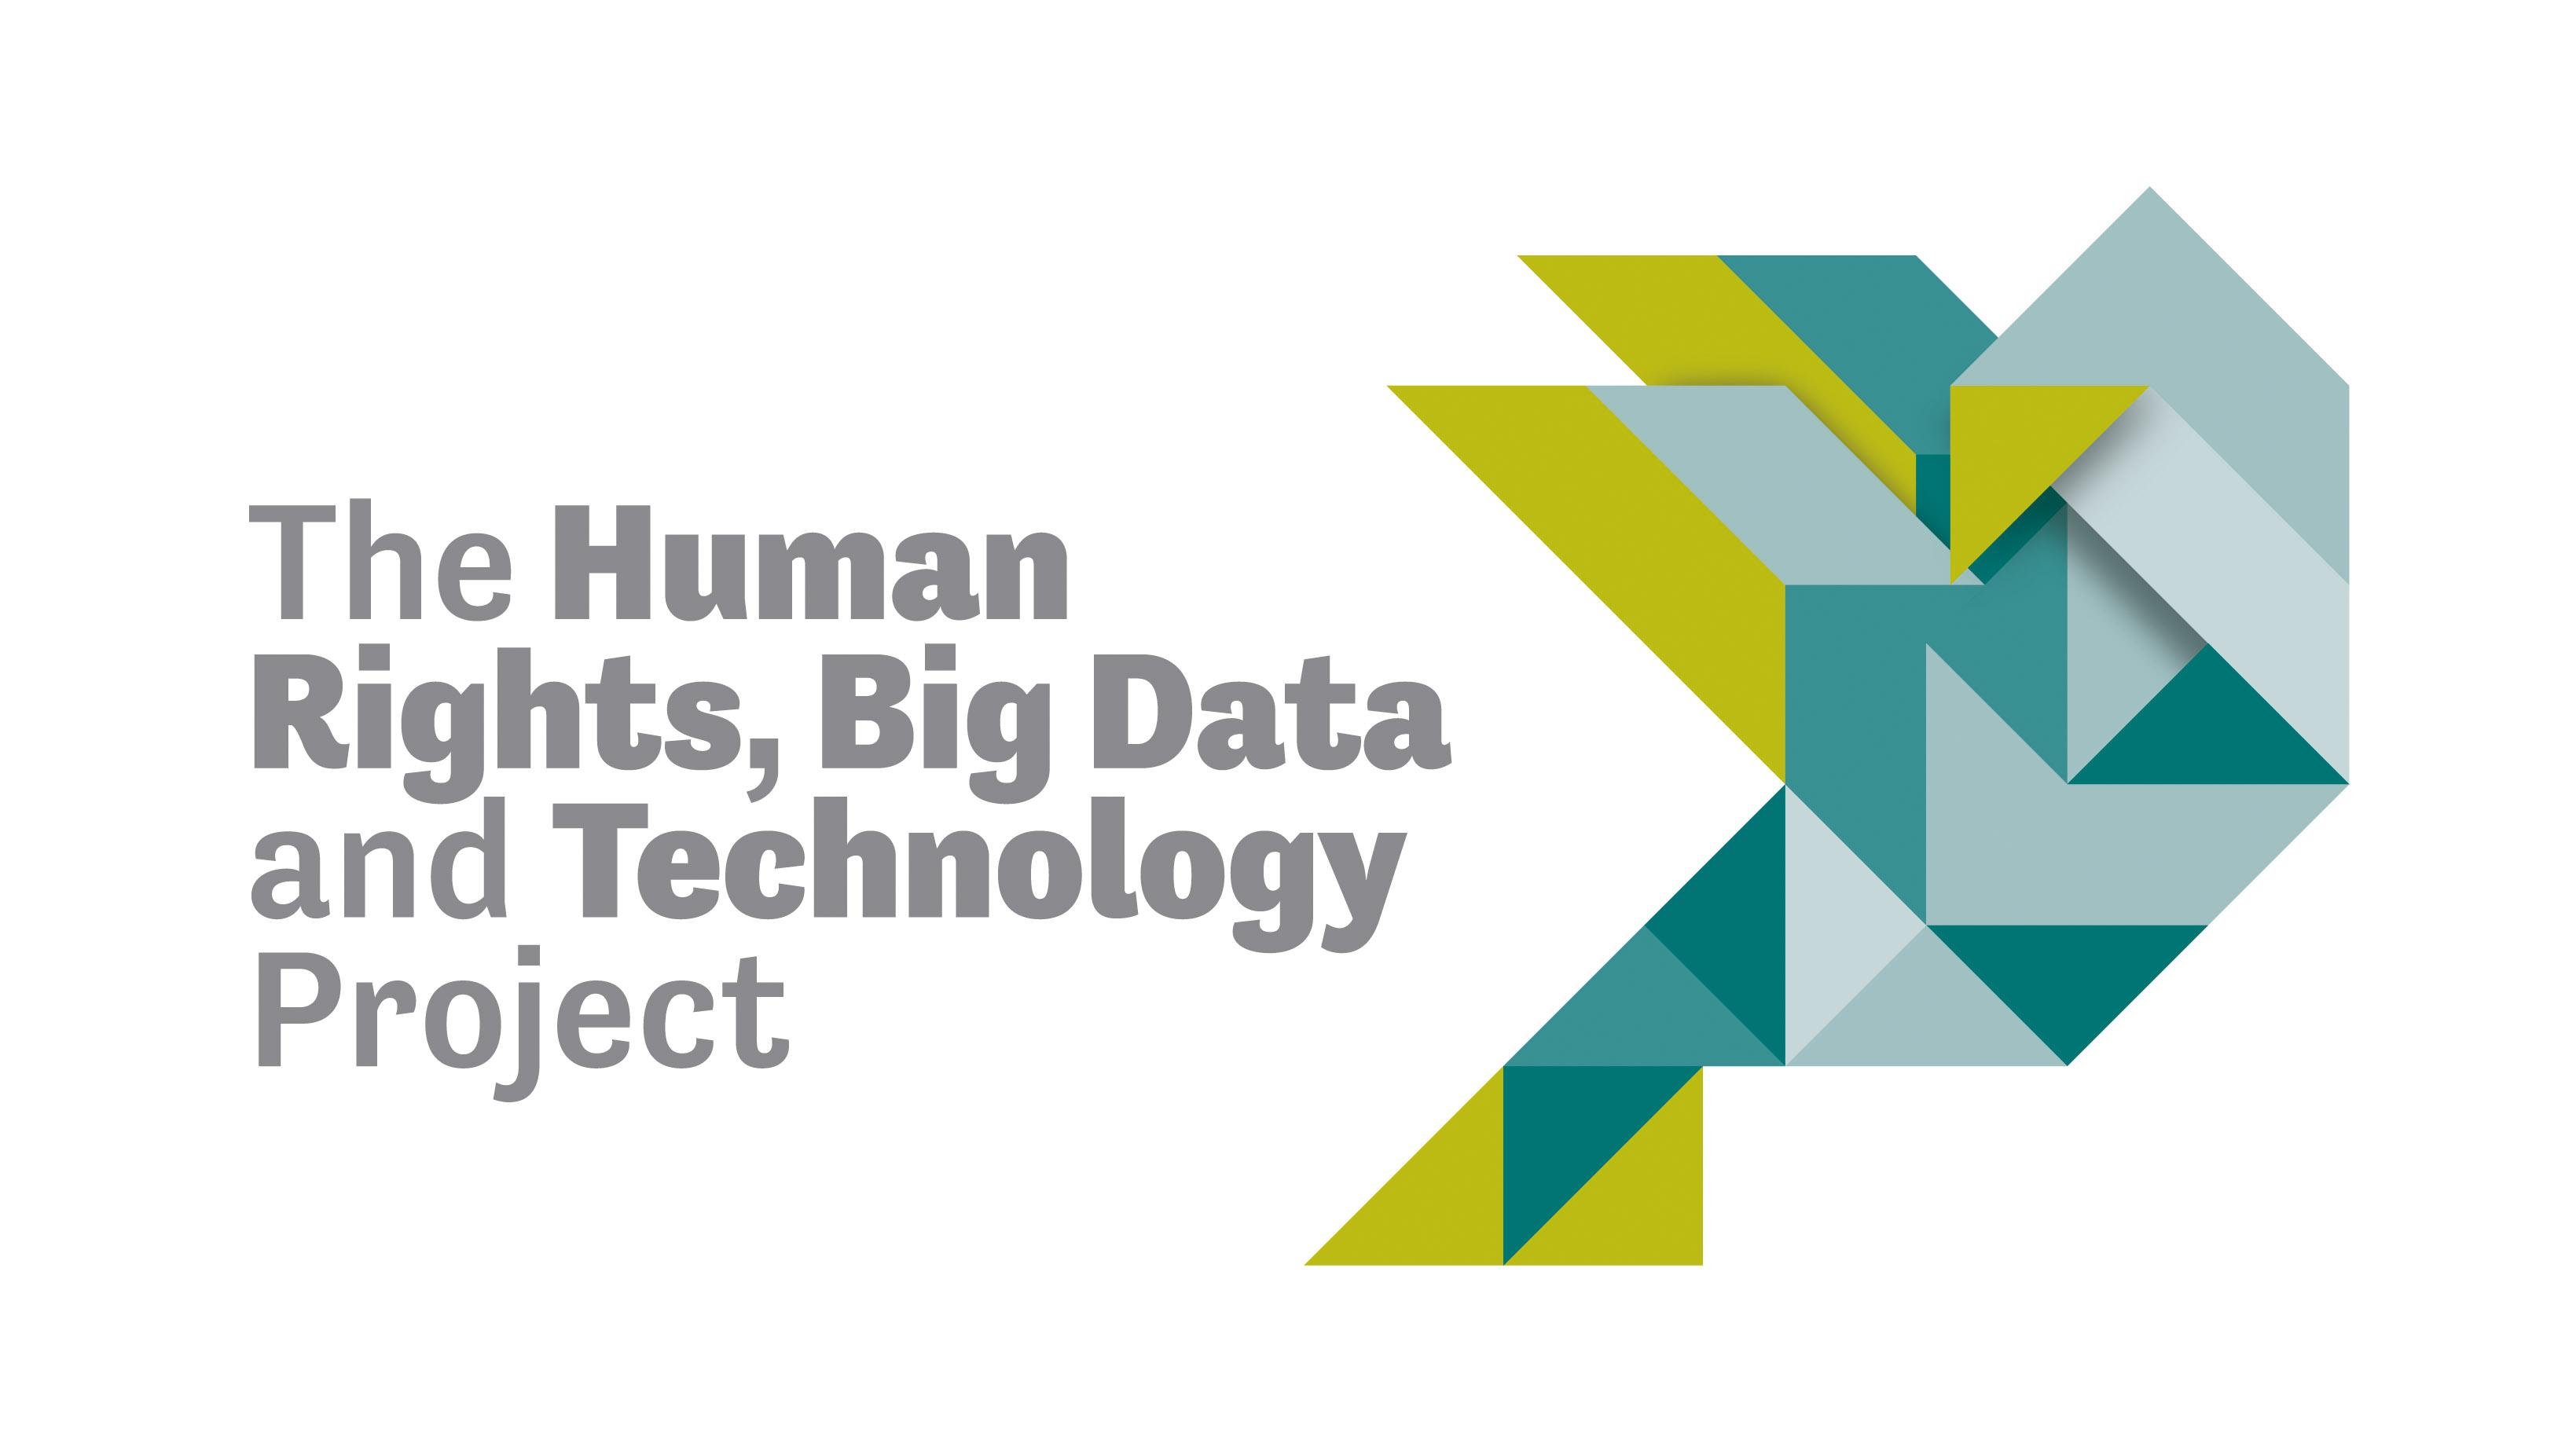 Human Rights, Big Data and Technology Project at the University of